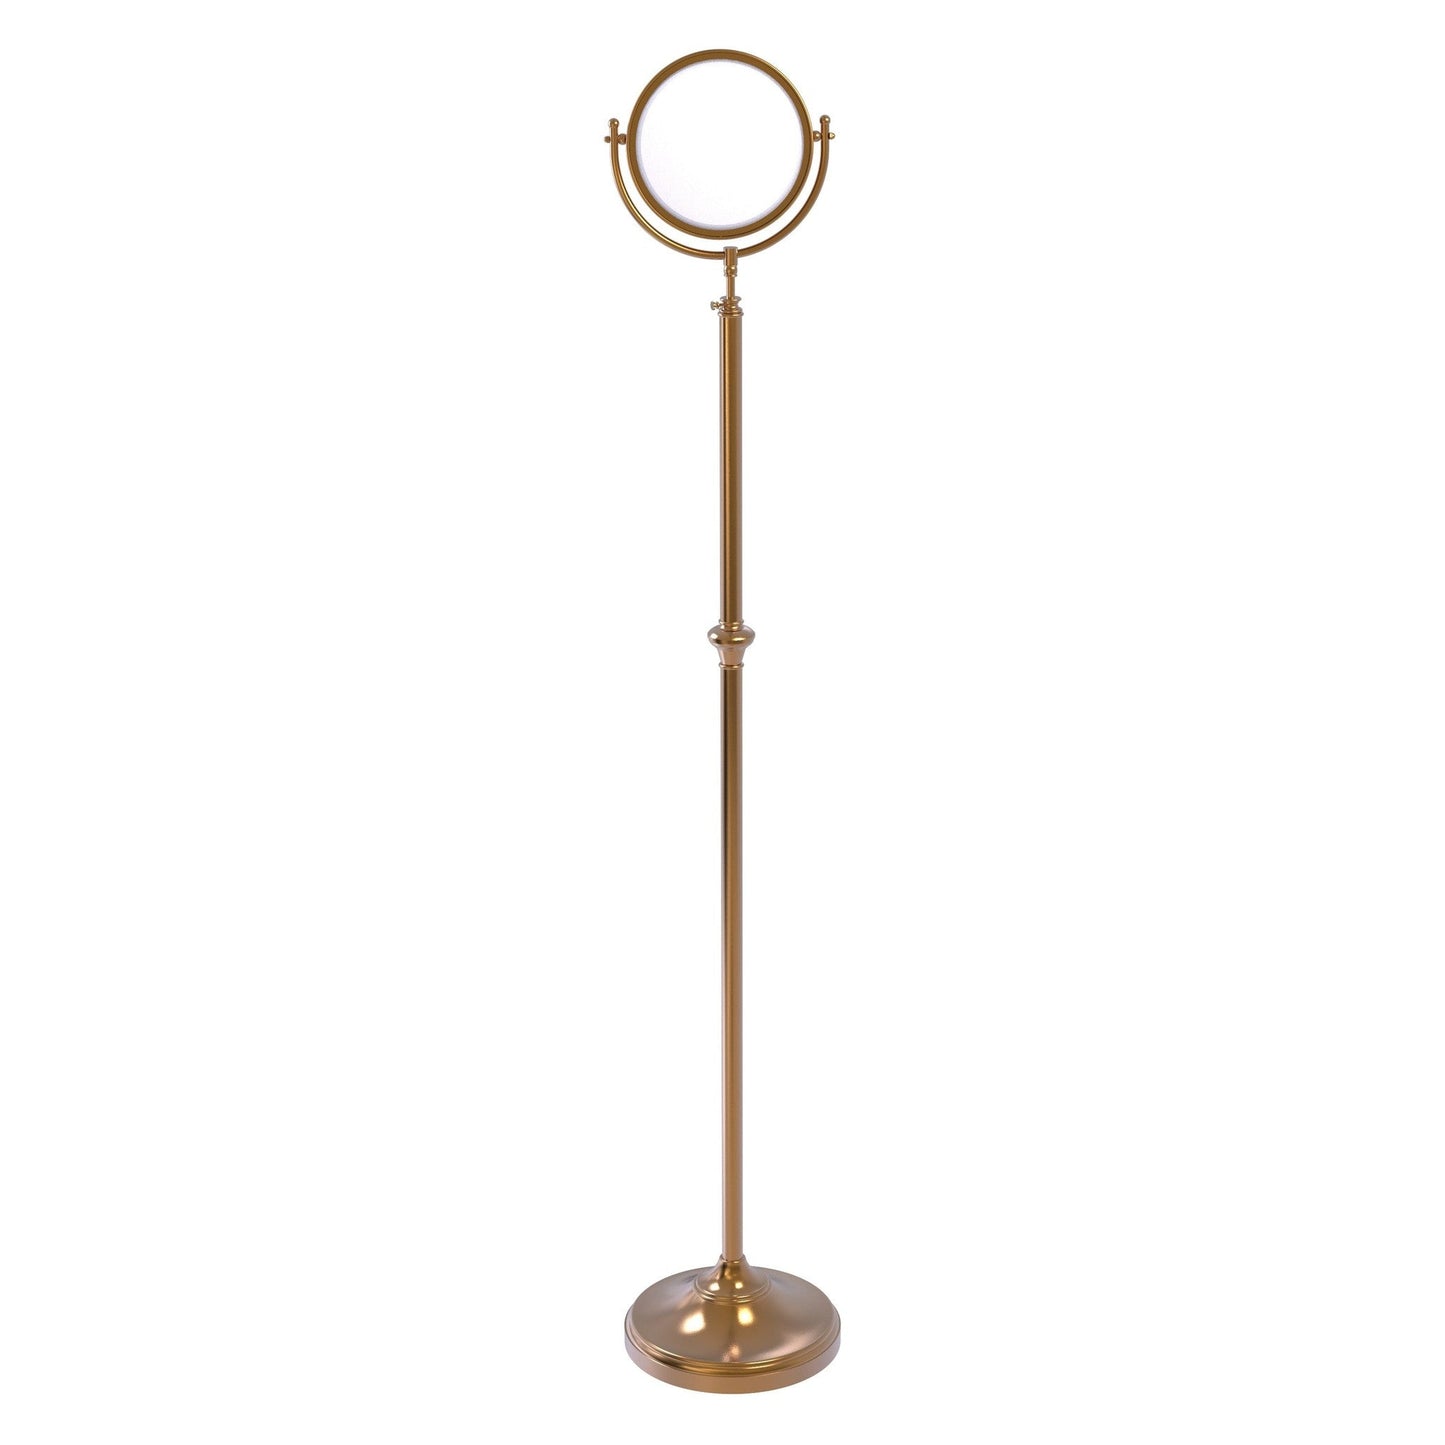 Allied Brass DMF-2/5X 10.5" x 10.5" Brushed Bronze Solid Brass Adjustable Height Floor Standing Make-Up Mirror With 5X Magnification